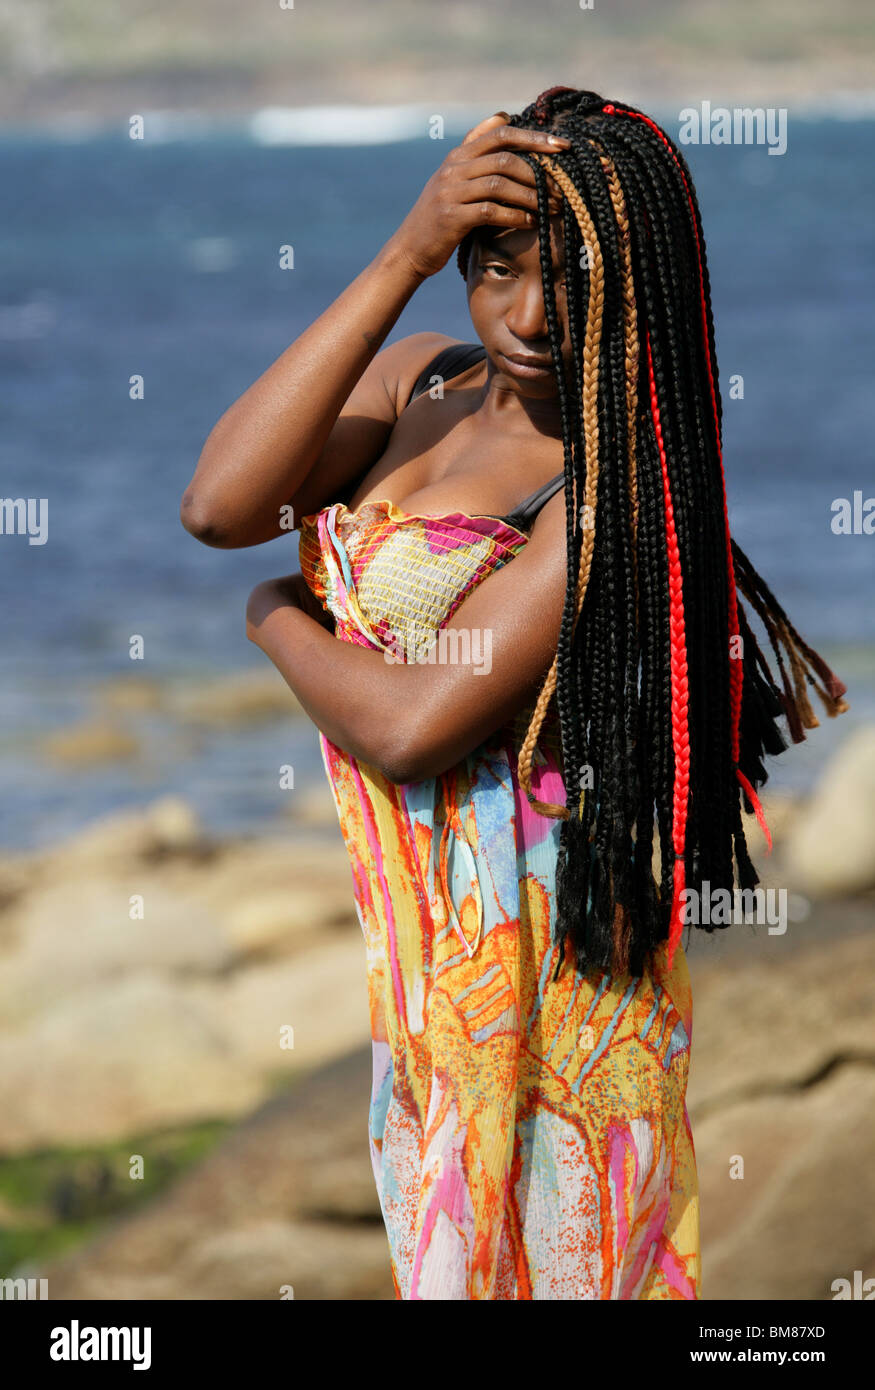 African Woman with Dreadlocks, and Wearing a Colourful Dress, Standing by the Sea. Stock Photo